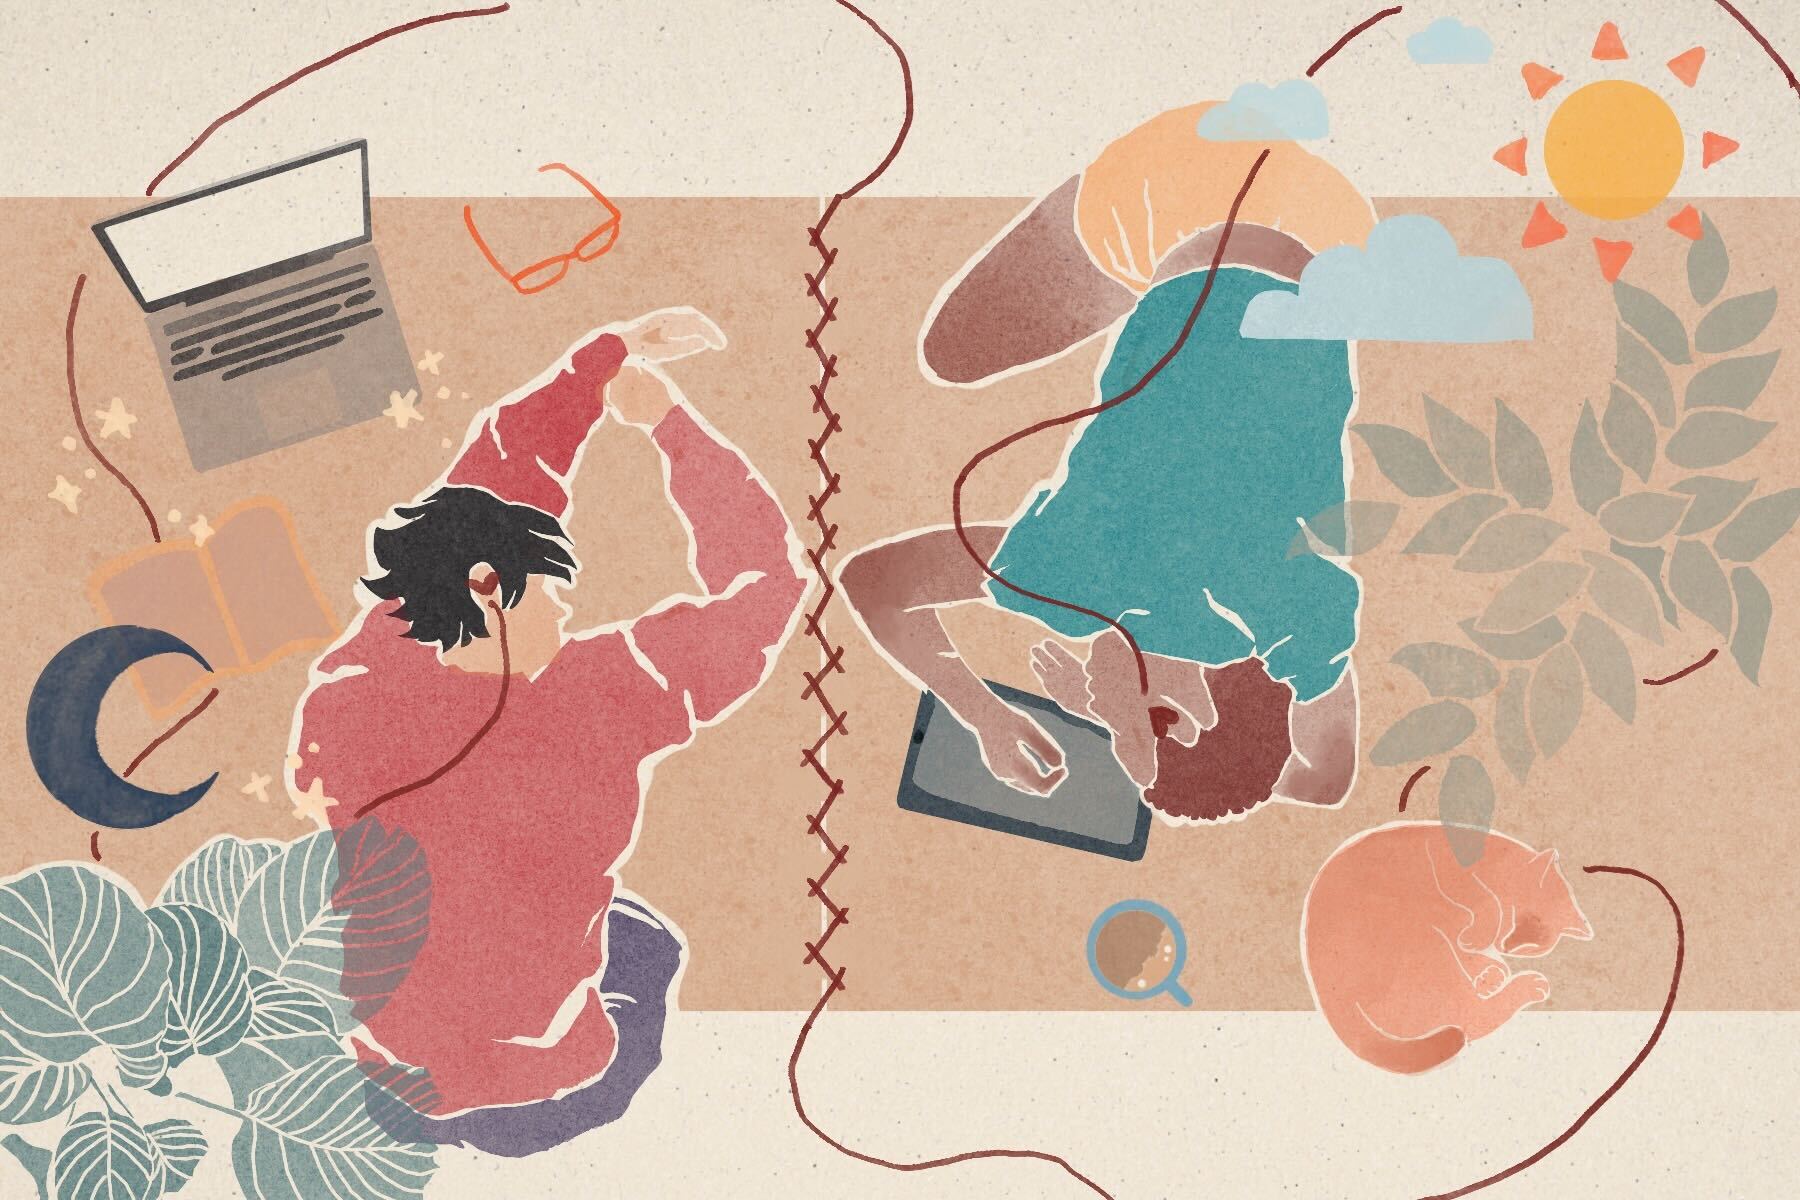 in an article about long distance relationships, an illustration of two people on the floor